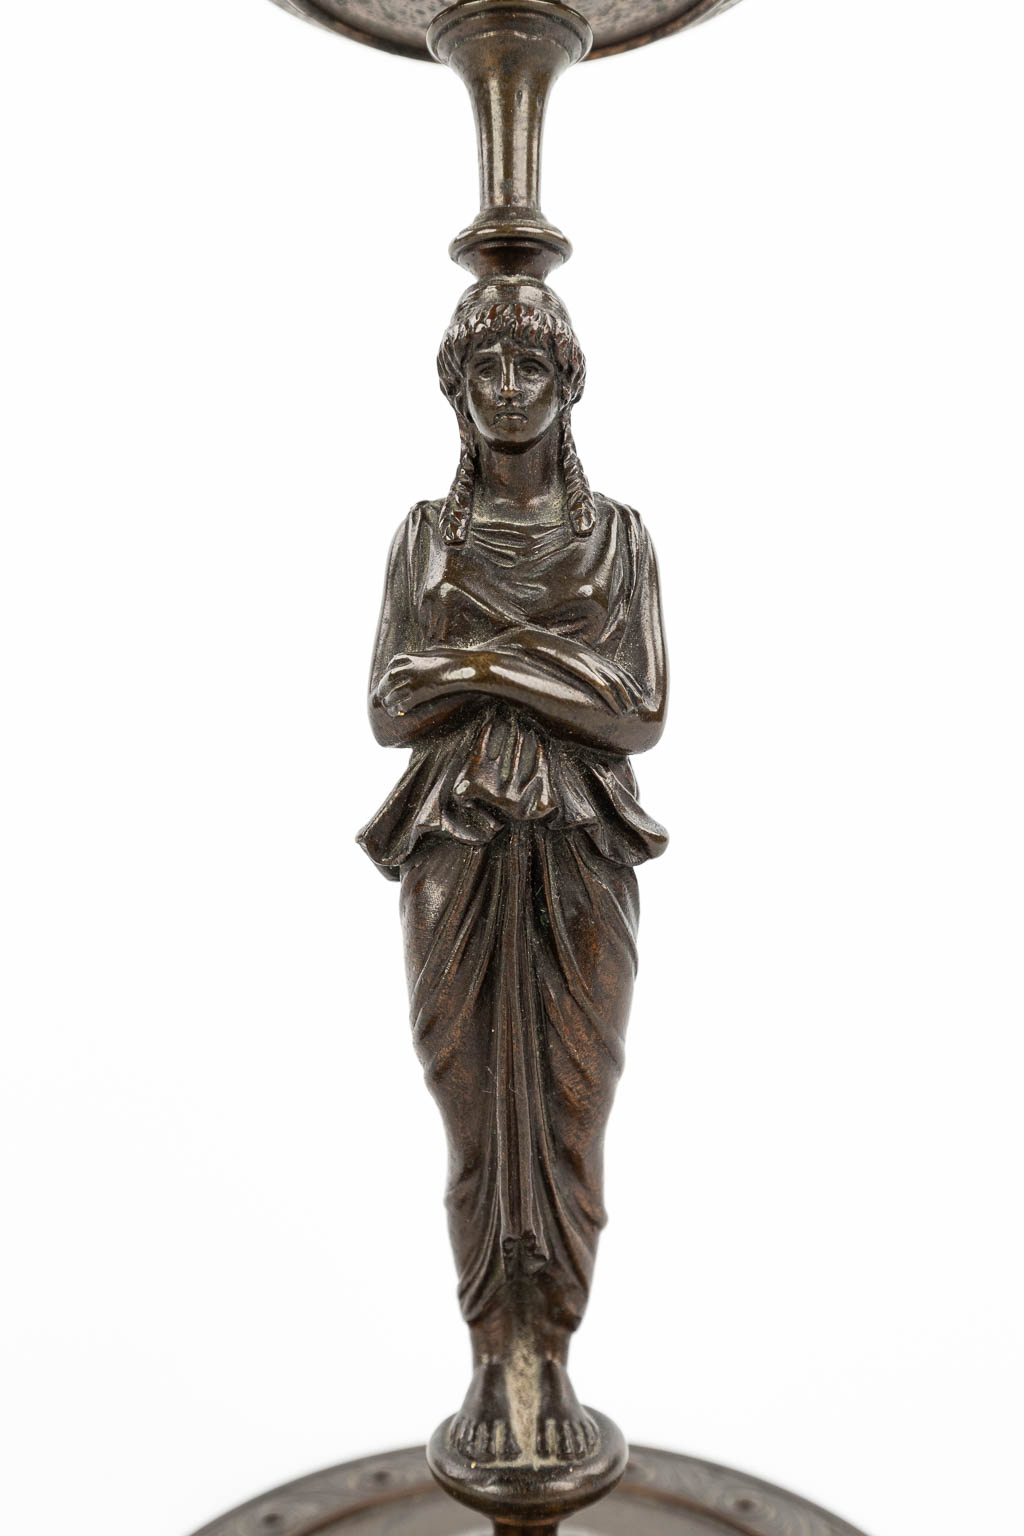 A pair of caryatid candlesticks, Empire style, patinated bronze, 19th century. (H:23cm)